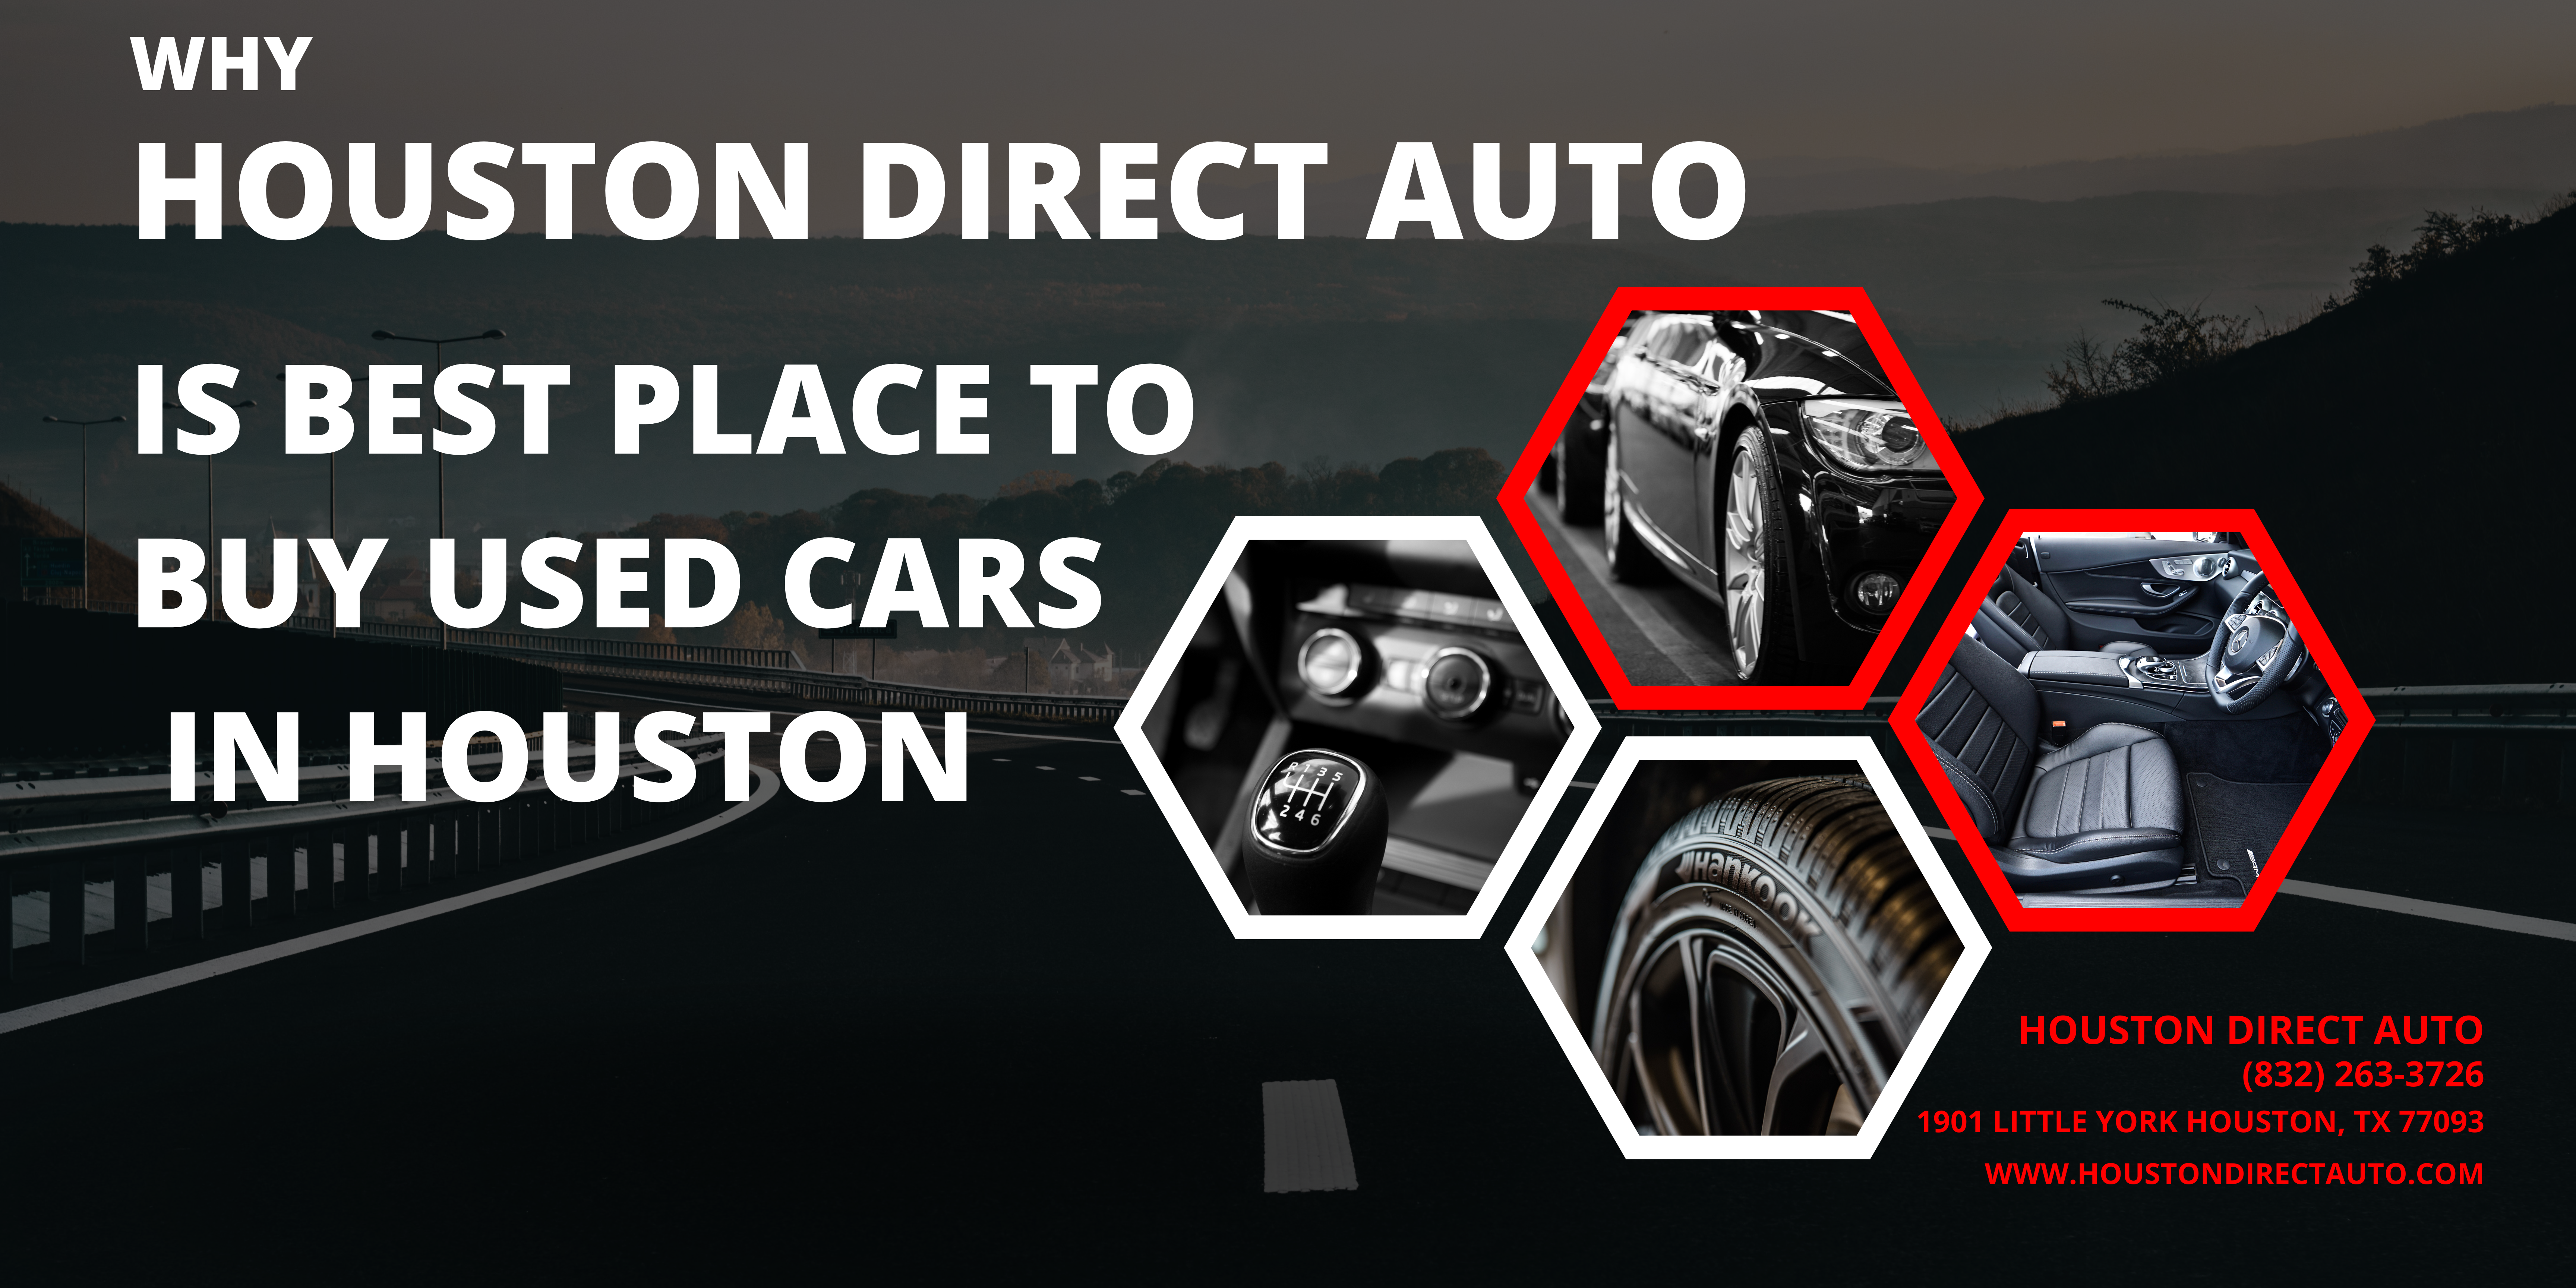 Why Houston Direct Auto is the Best Place to Buy Used Cars in Houston